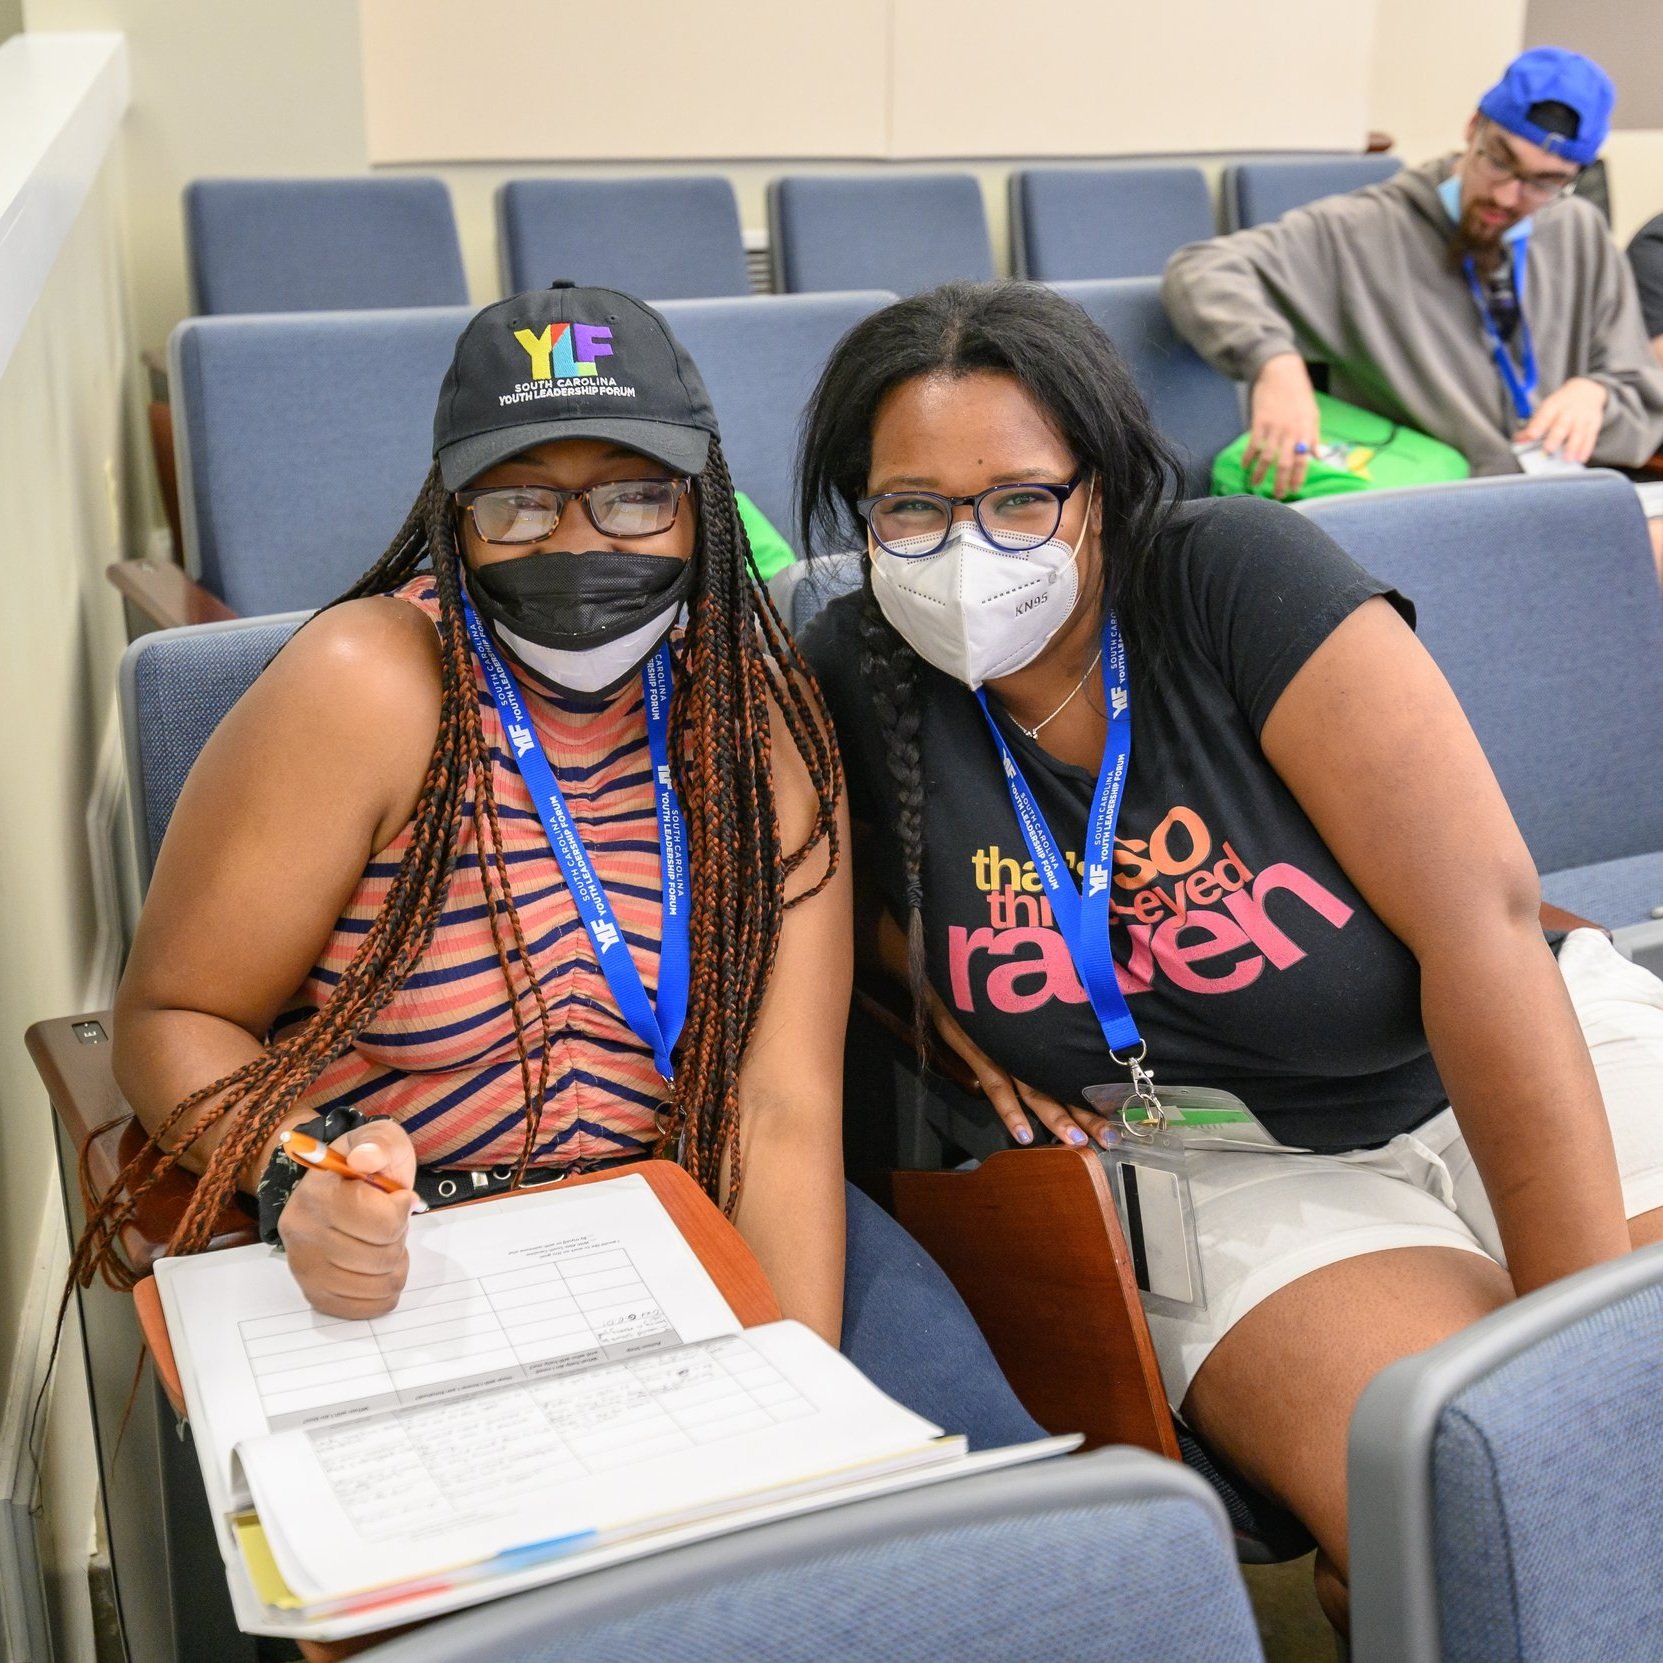 YLF delegate and YLF staffer smile behind facemasks while seated in the classroom.